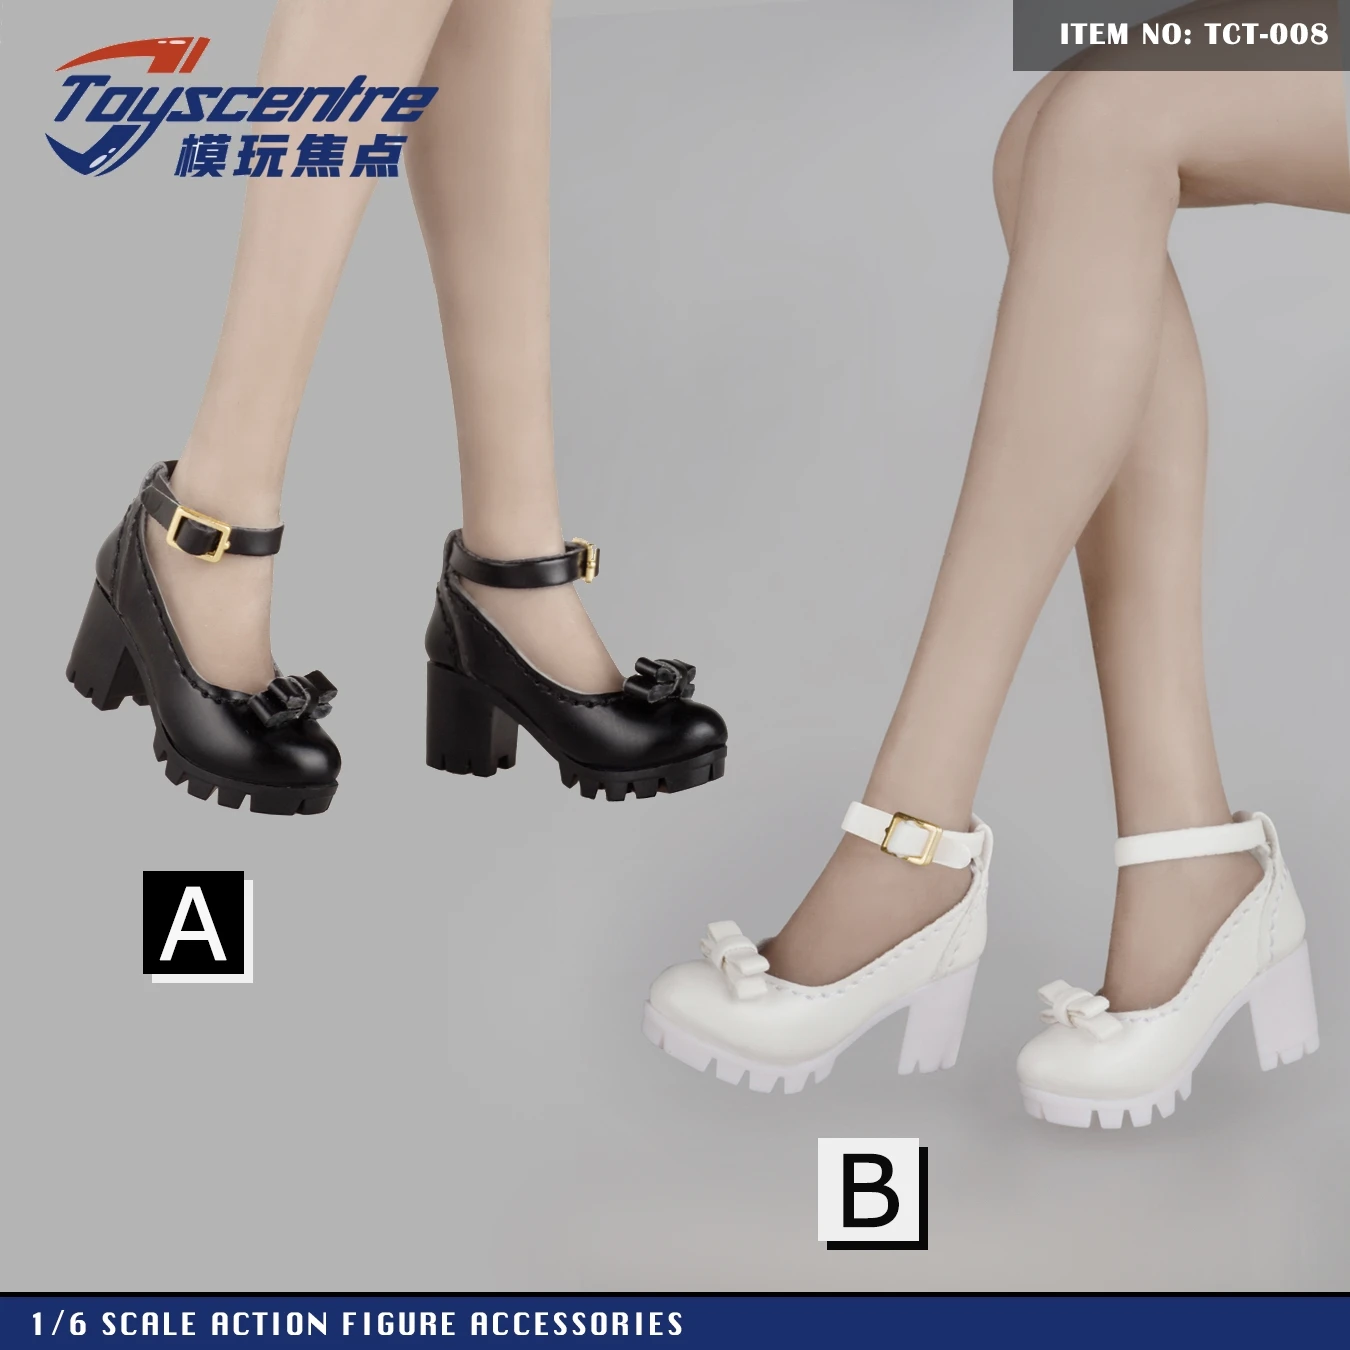 

1/6 Scale Shoes Female Action Figure High-heeled Sandals Model for OB OD BJD Dolls 12inch Accessories Soldier Body Collection